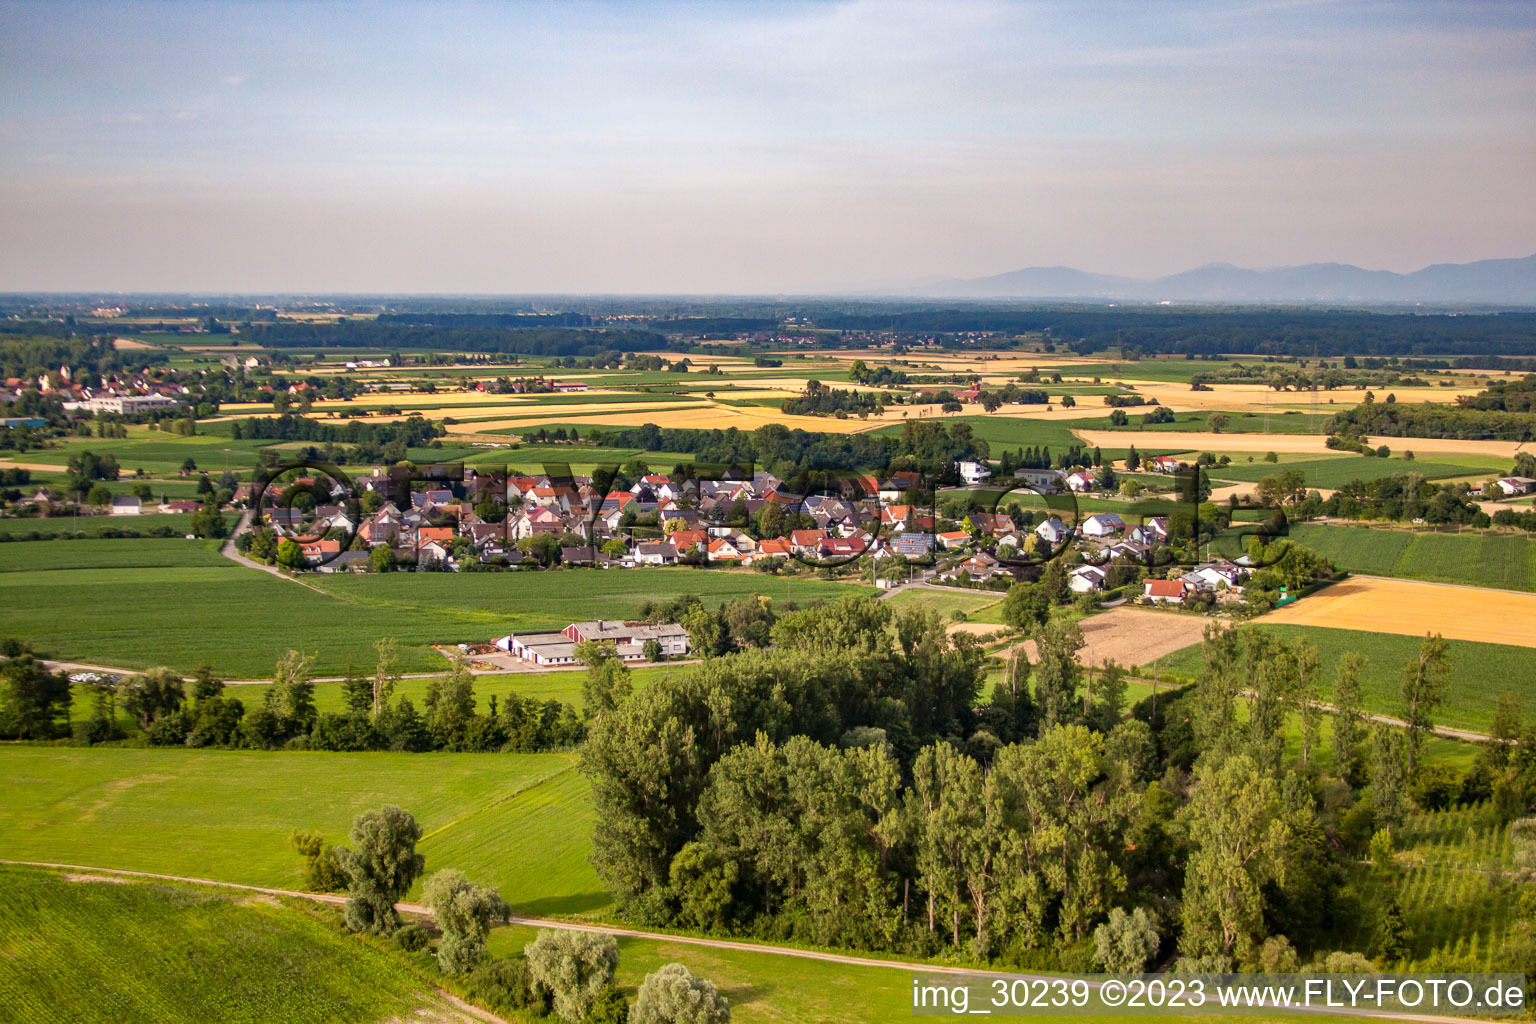 From the southwest in the district Querbach in Kehl in the state Baden-Wuerttemberg, Germany